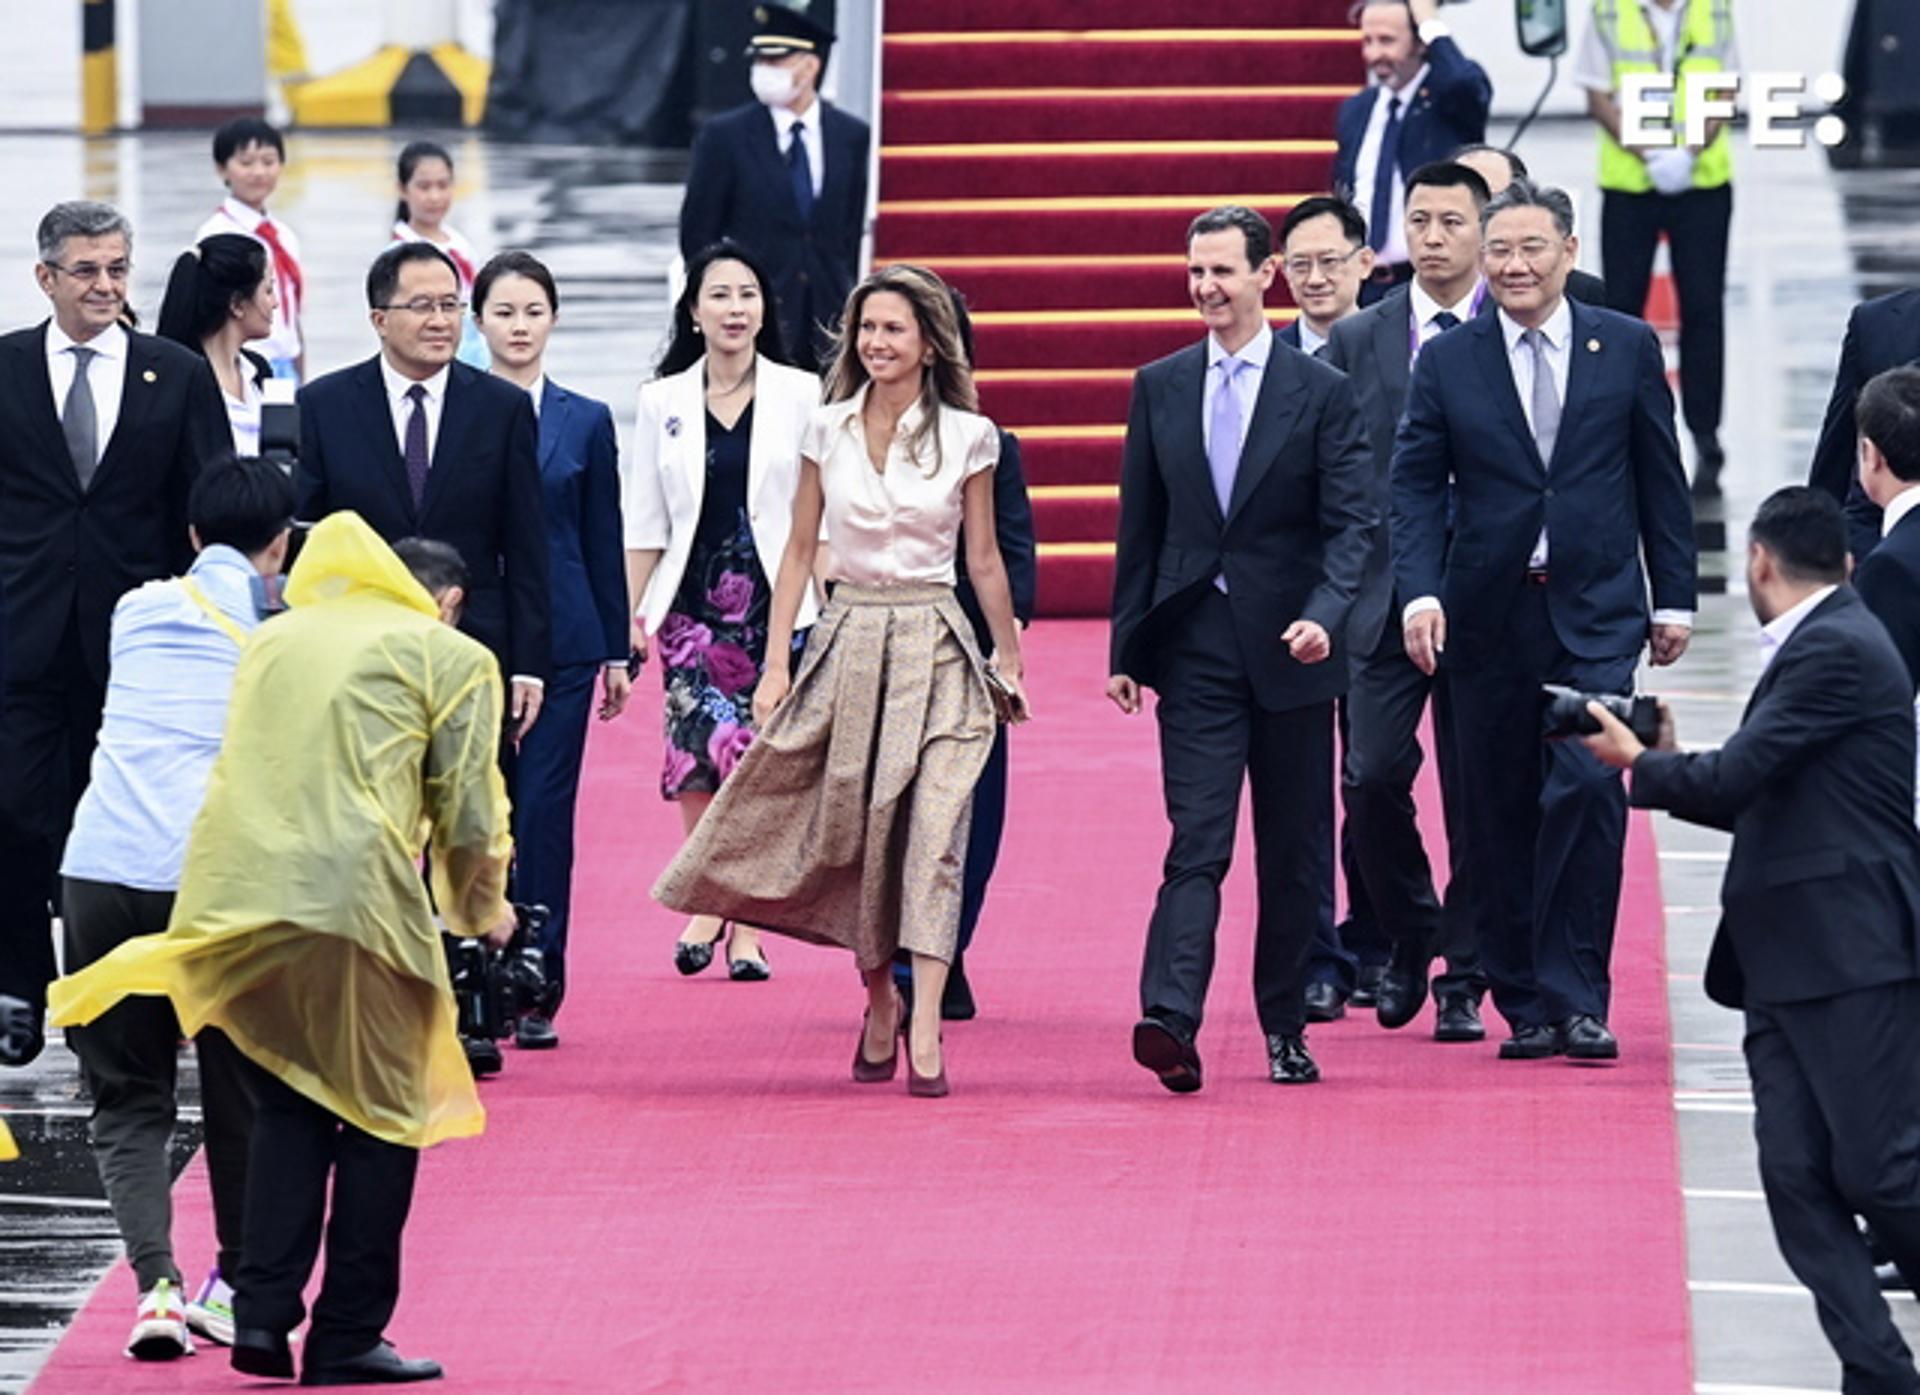 Syrian President Bashar al-Assad (6-R) and his spouse Asma al-Assad (6-L) arrive in Hangzhou, China, 21 September 2023. Al-Assad arrived on 21 Sepotember in China to attend the opening ceremony of the 19th Asian Games. (Siria) EFE/EPA/XINHUA / Xu Yu CHINA OUT / UK AND IRELAND OUT / MANDATORY CREDIT EDITORIAL USE ONLY
